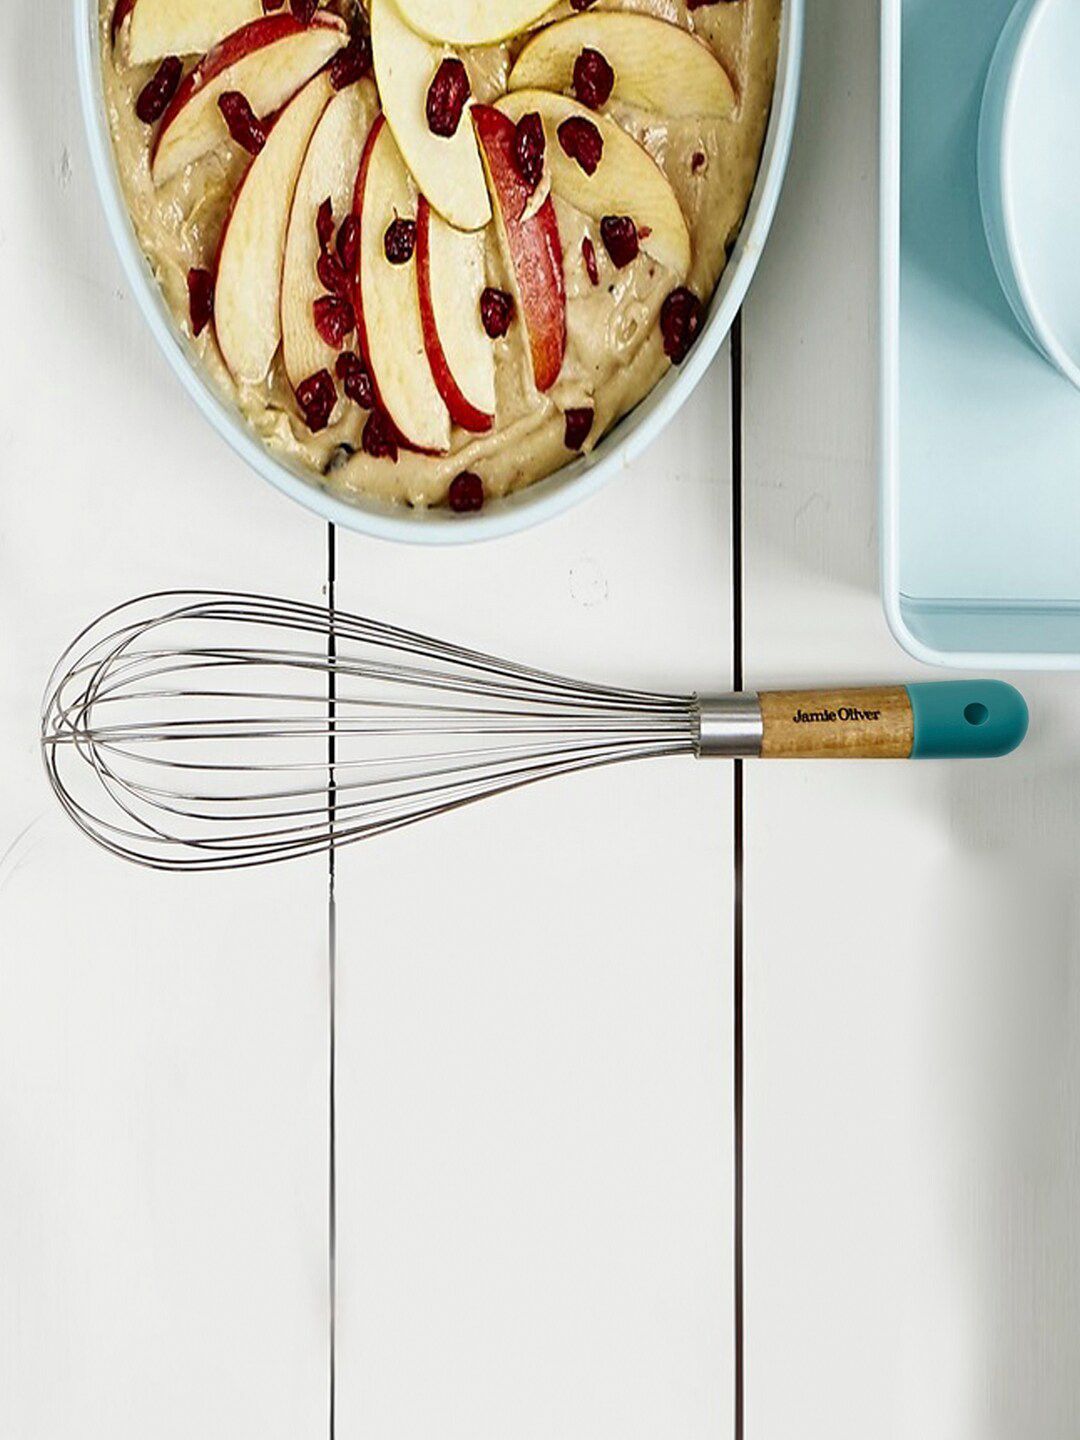 Jamie Oliver Green & Steel-Toned Balloon Whisk Price in India